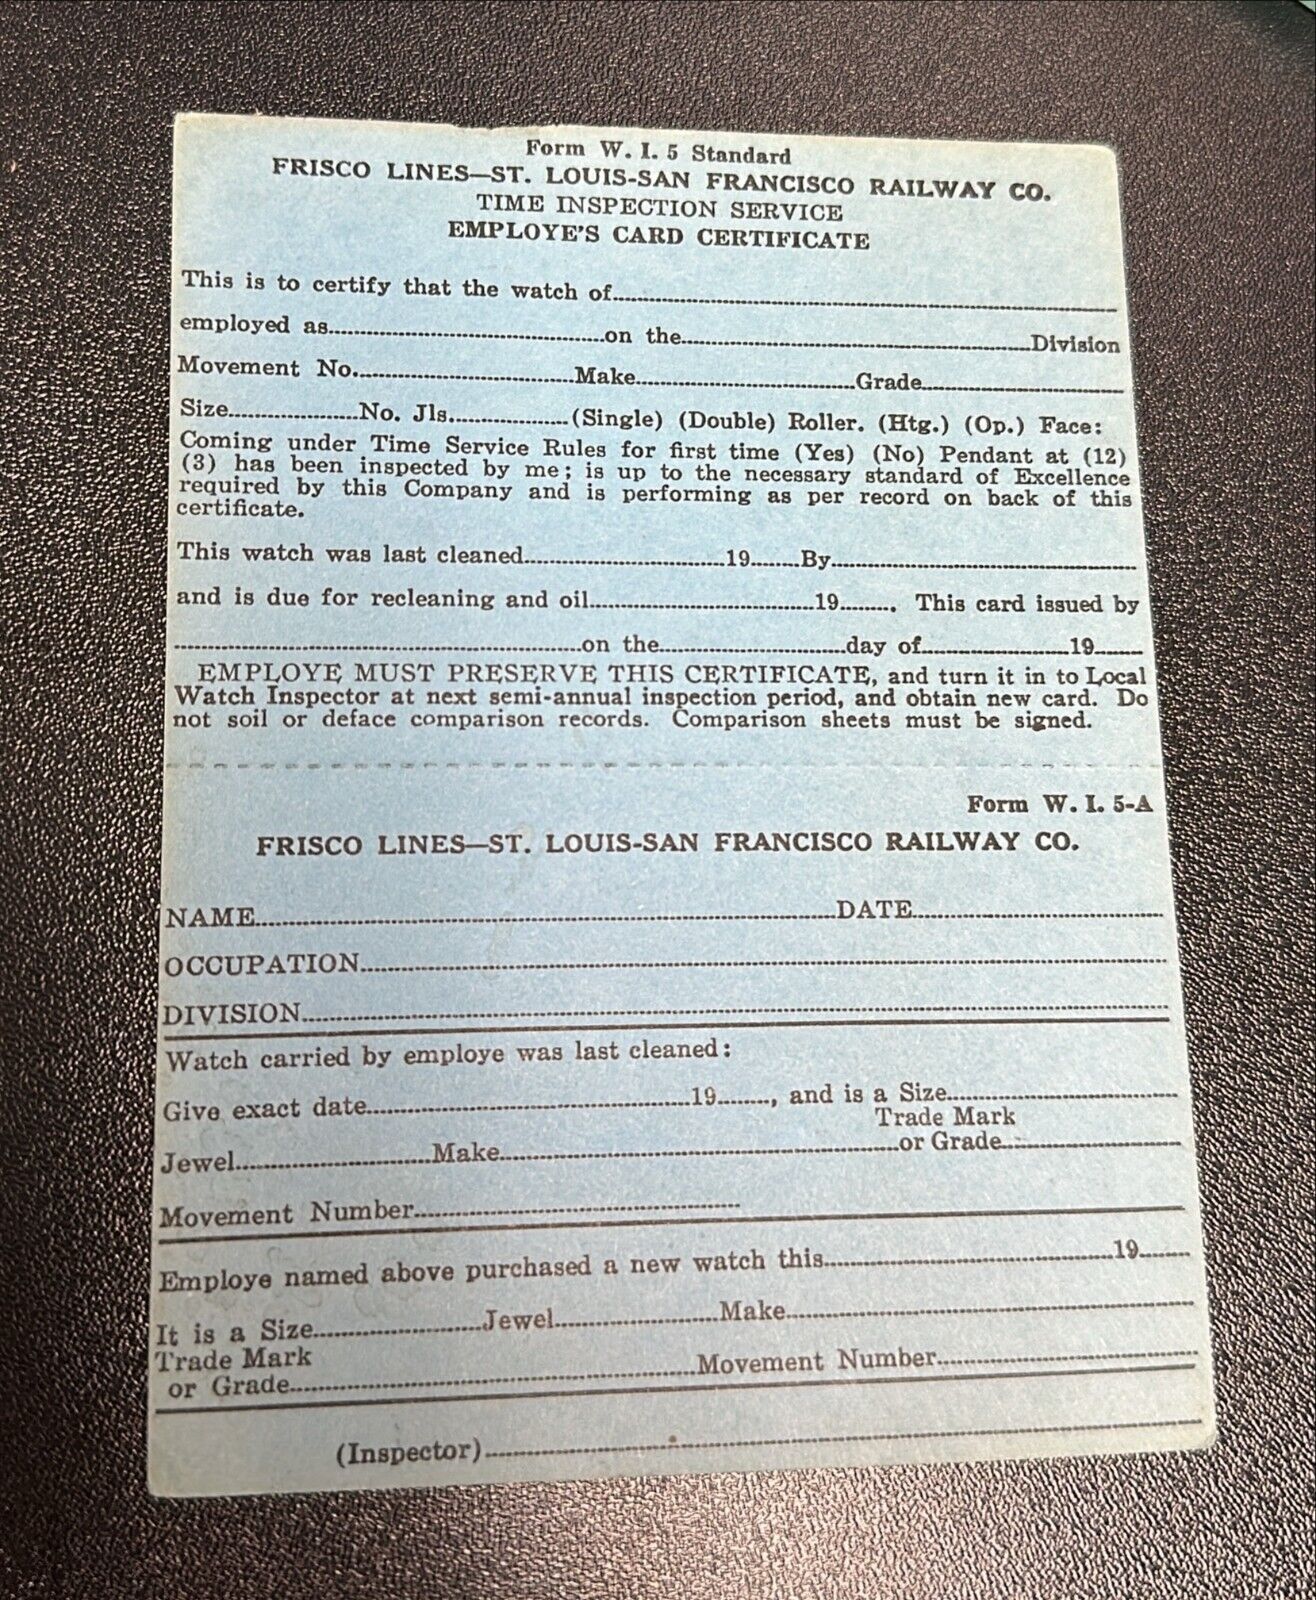 Frisco Lines-St. Louis-San Francisco Railway Co. Employee Time Inspection Card